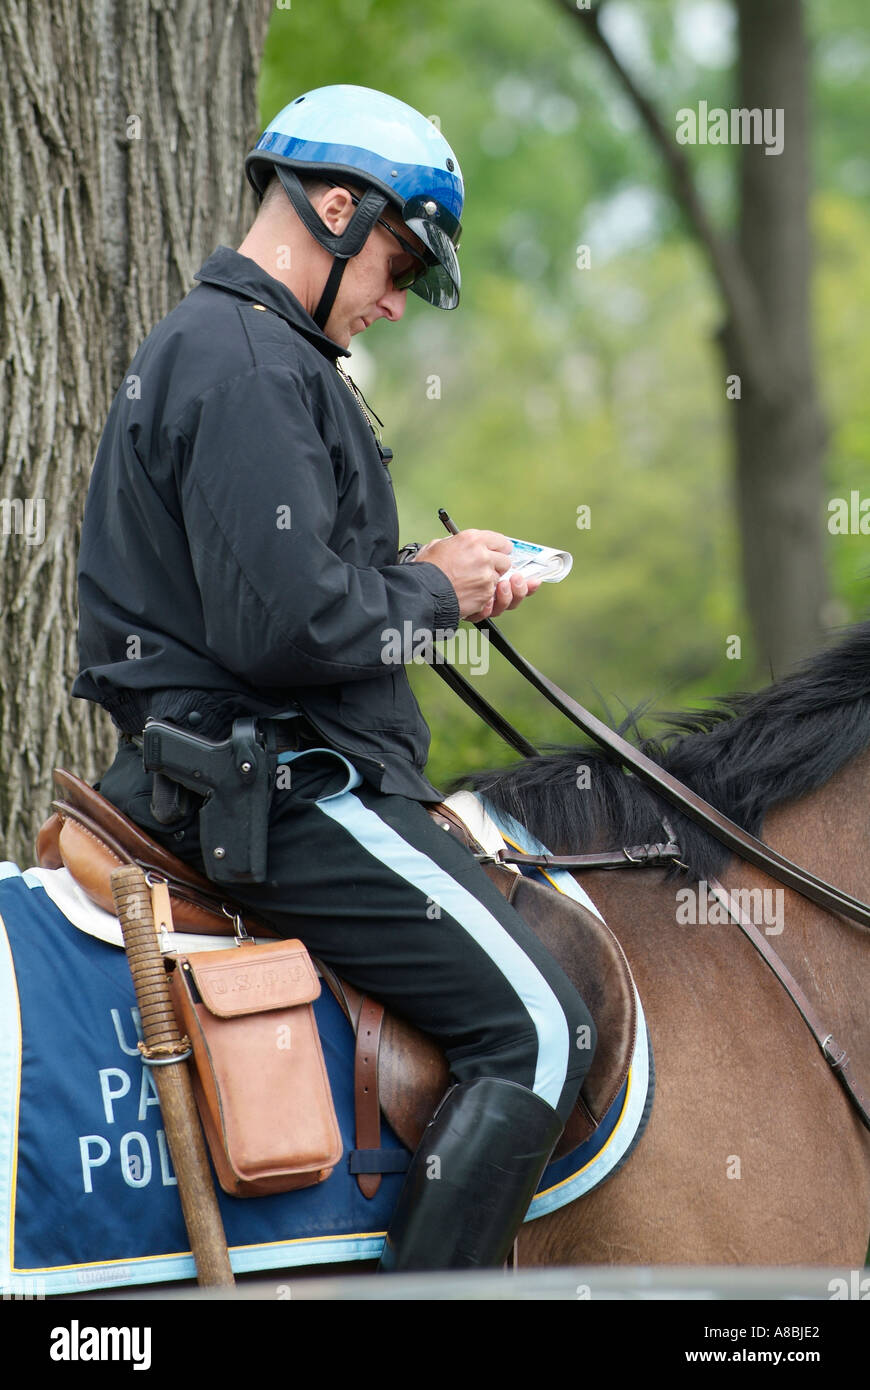 US Park Police Officer issue ticket for traffic violation Stock Photo